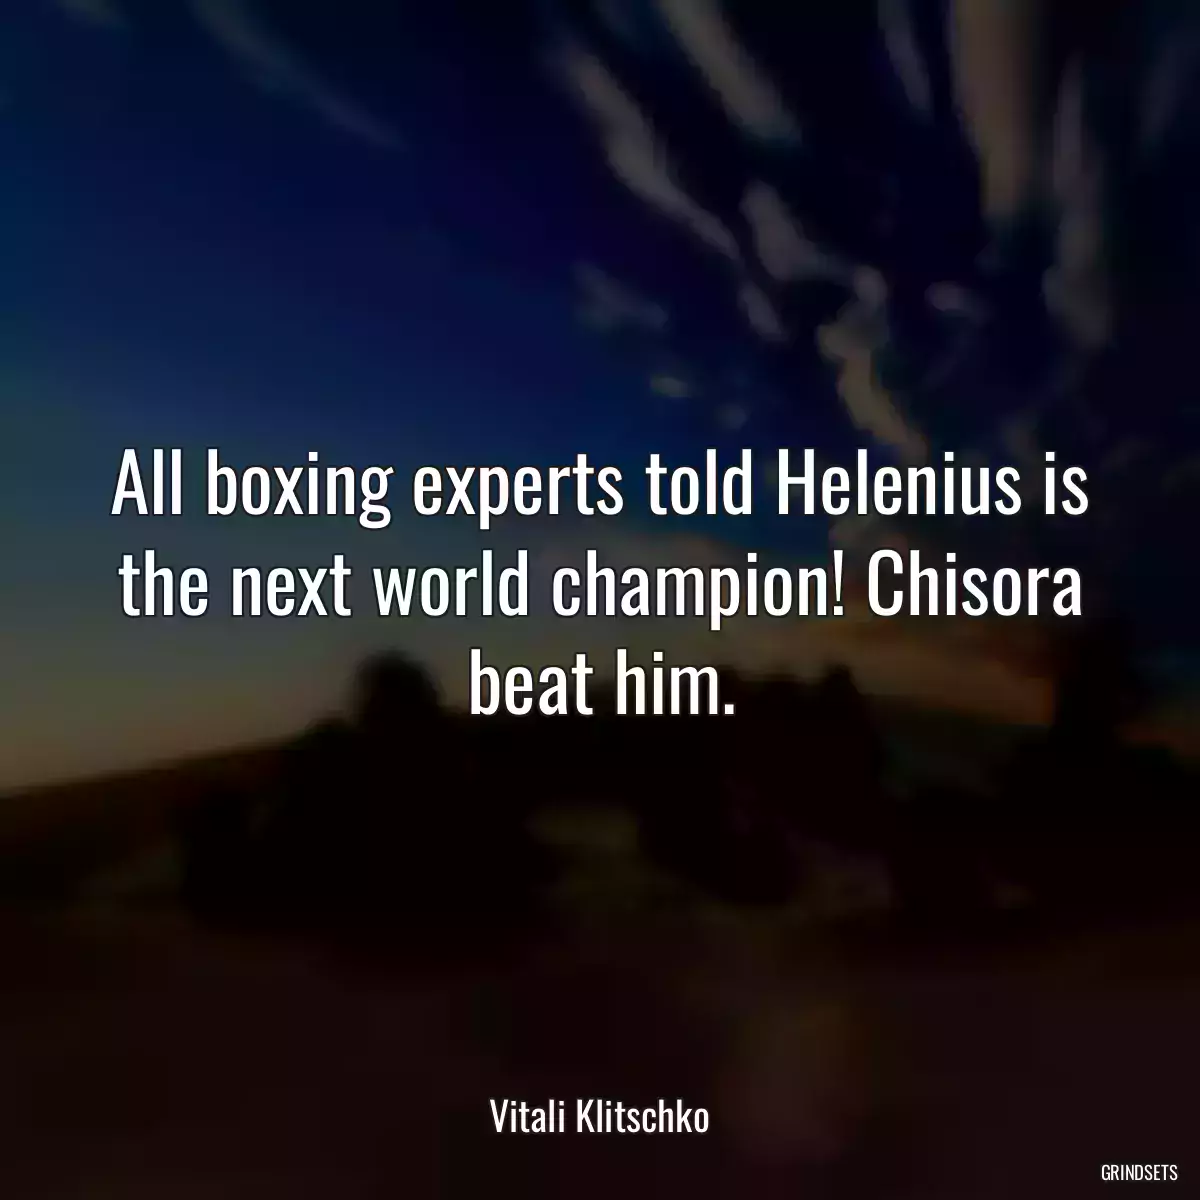 All boxing experts told Helenius is the next world champion! Chisora beat him.